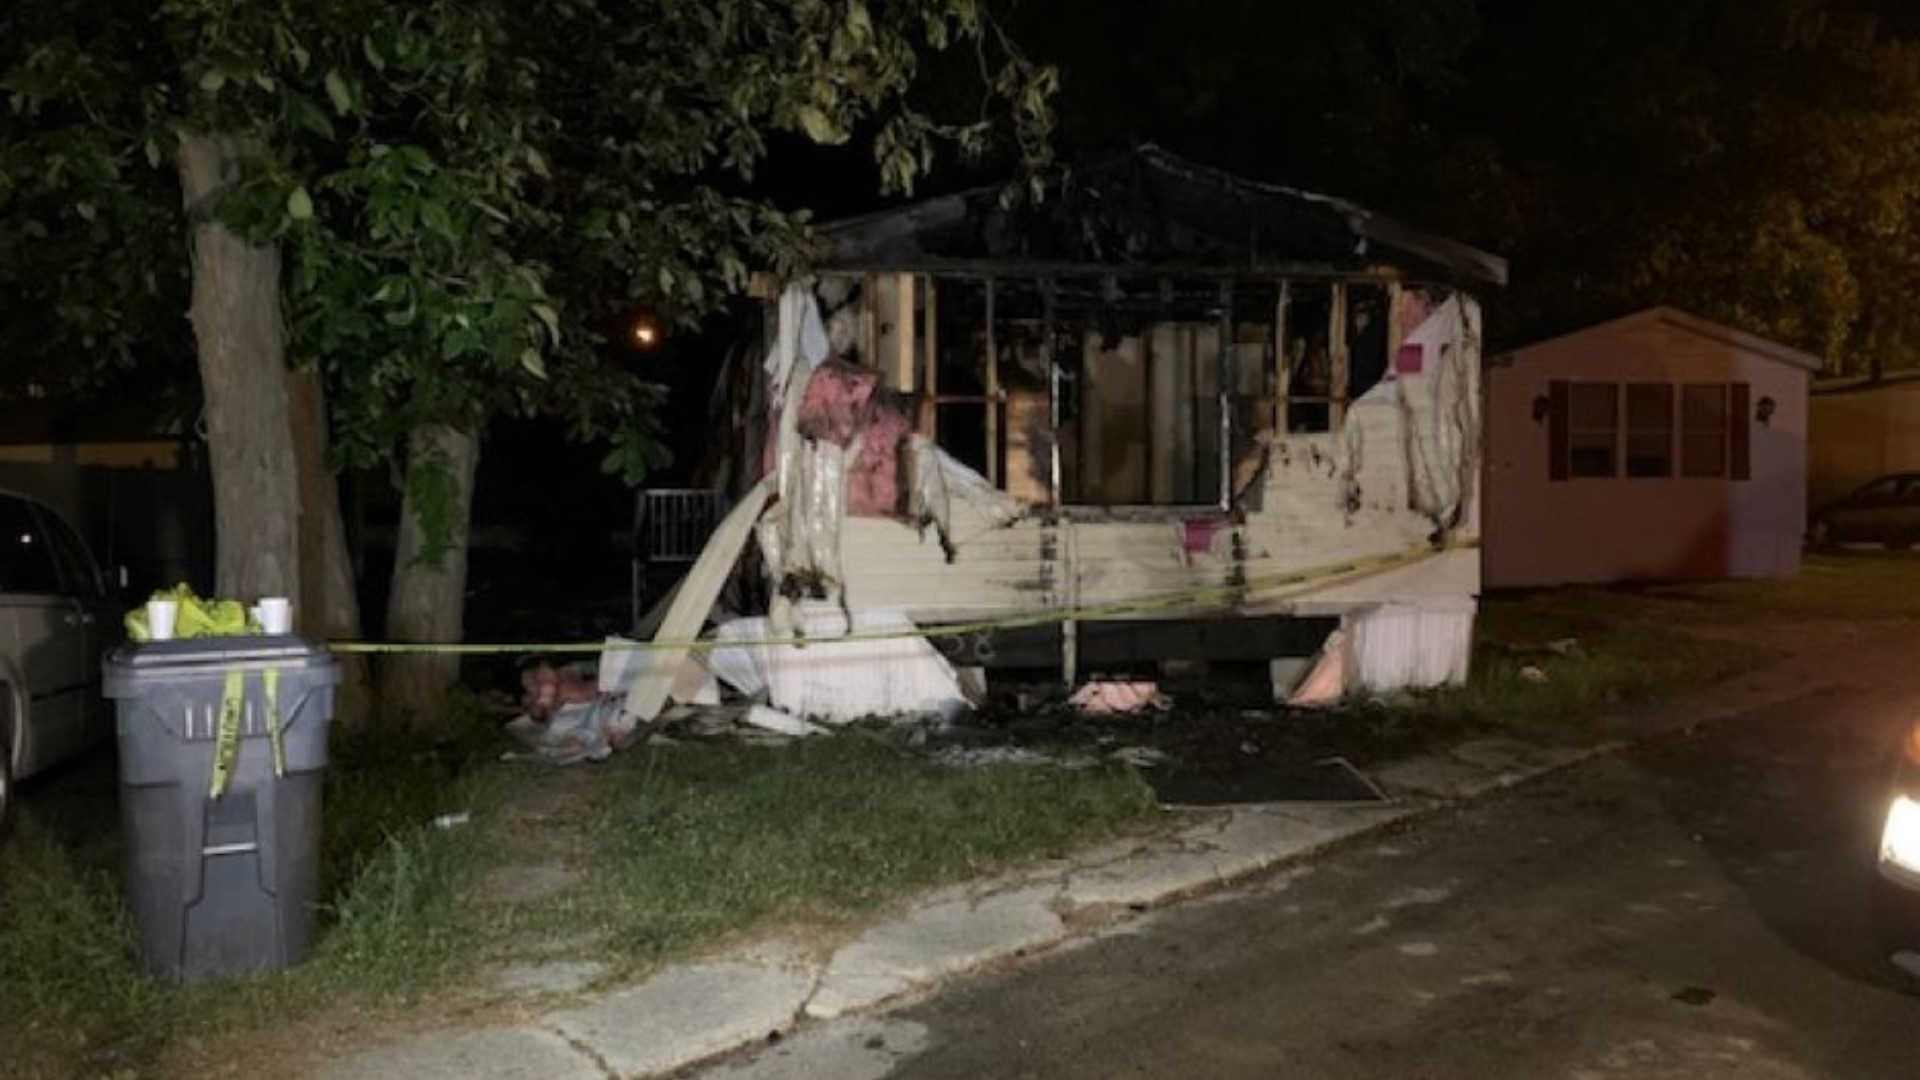 A young girl is in an Indianapolis hospital after being hurt in a Monday evening house fire in rural Delaware County.